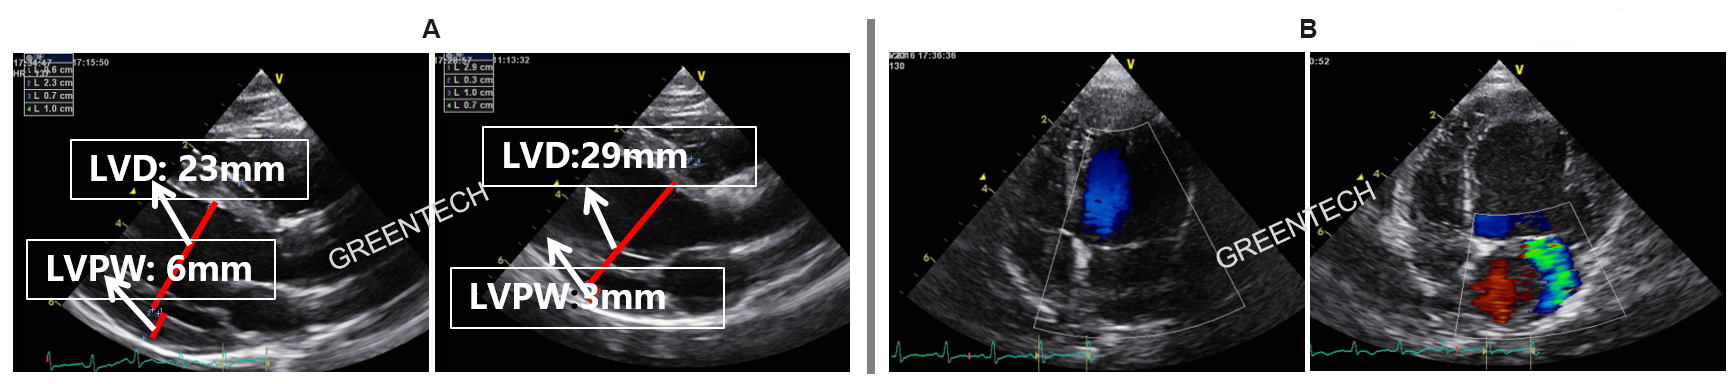 Myocardial ischemia-induced ventricular remodeling.png